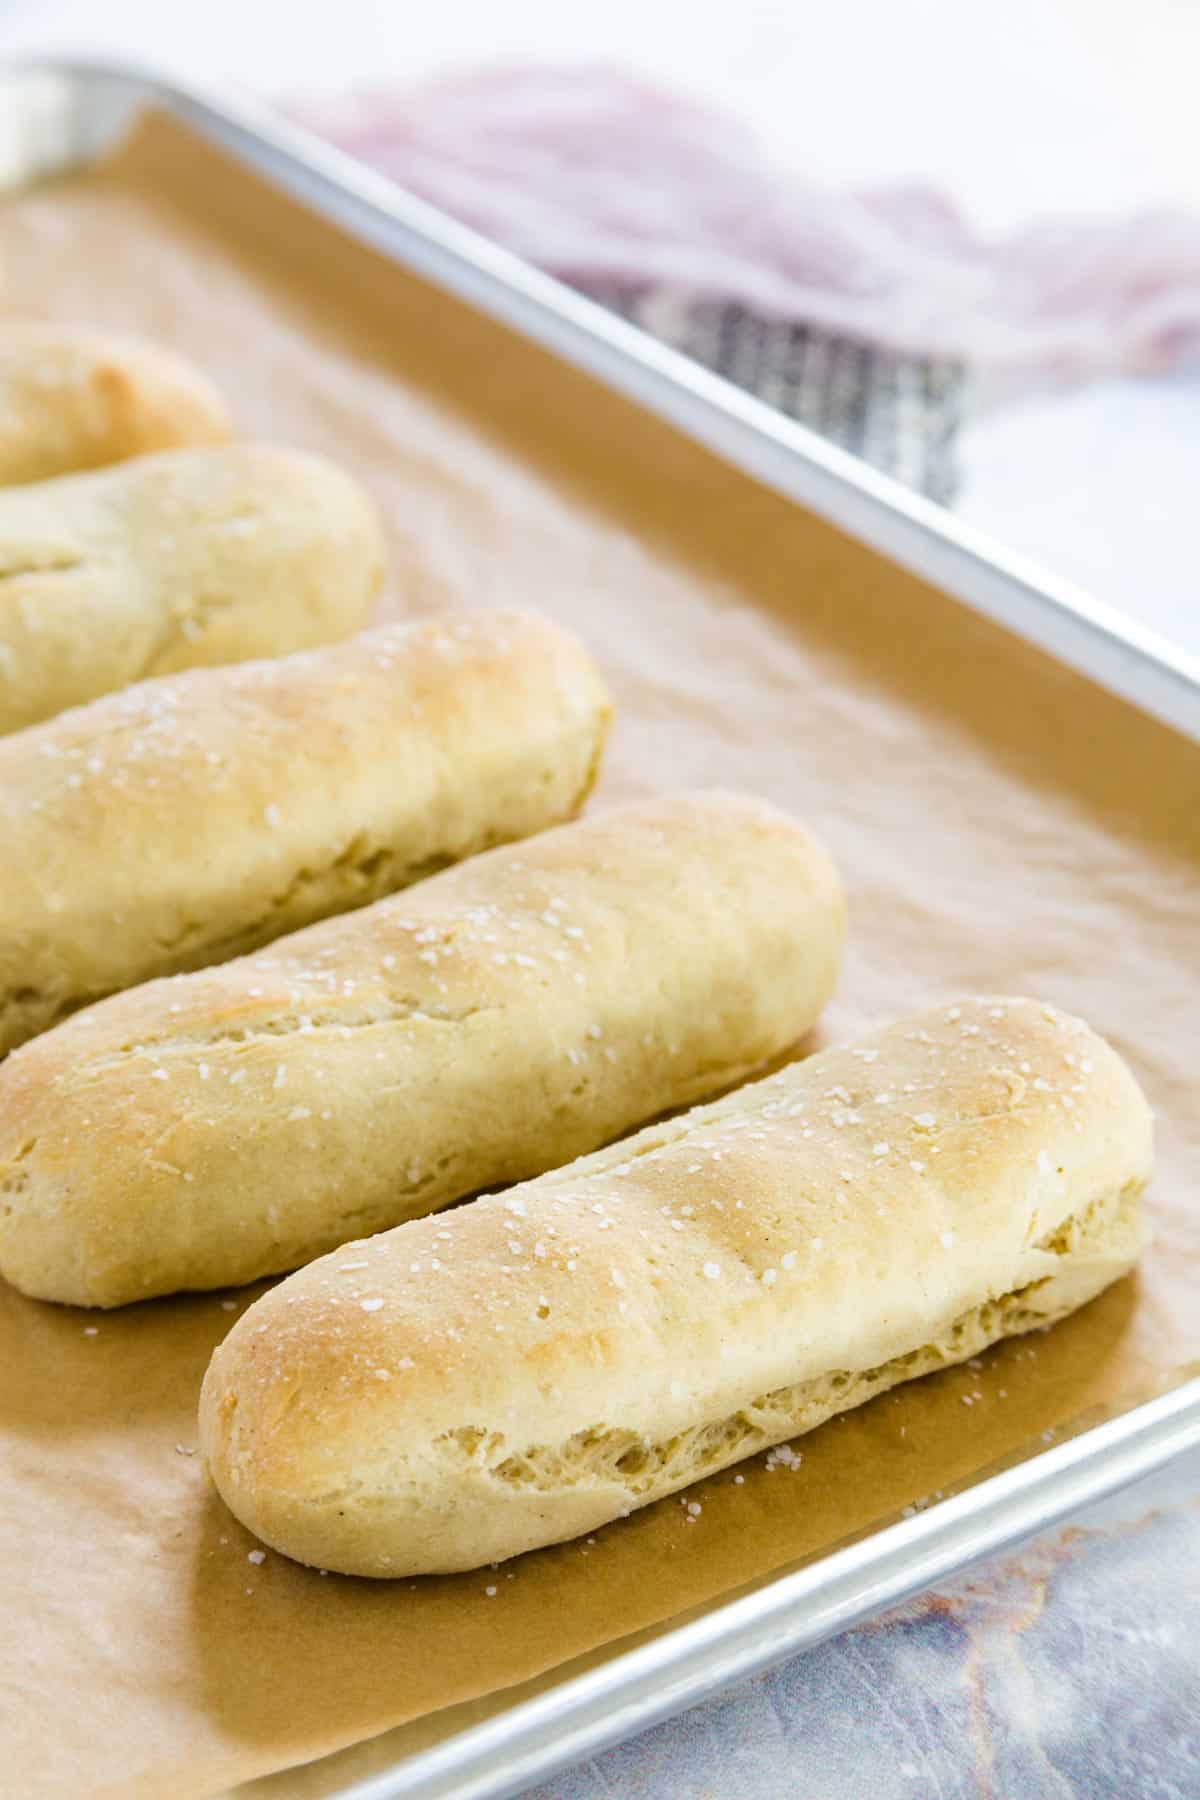 Baked breadsticks arranged in a row on a baking tray.